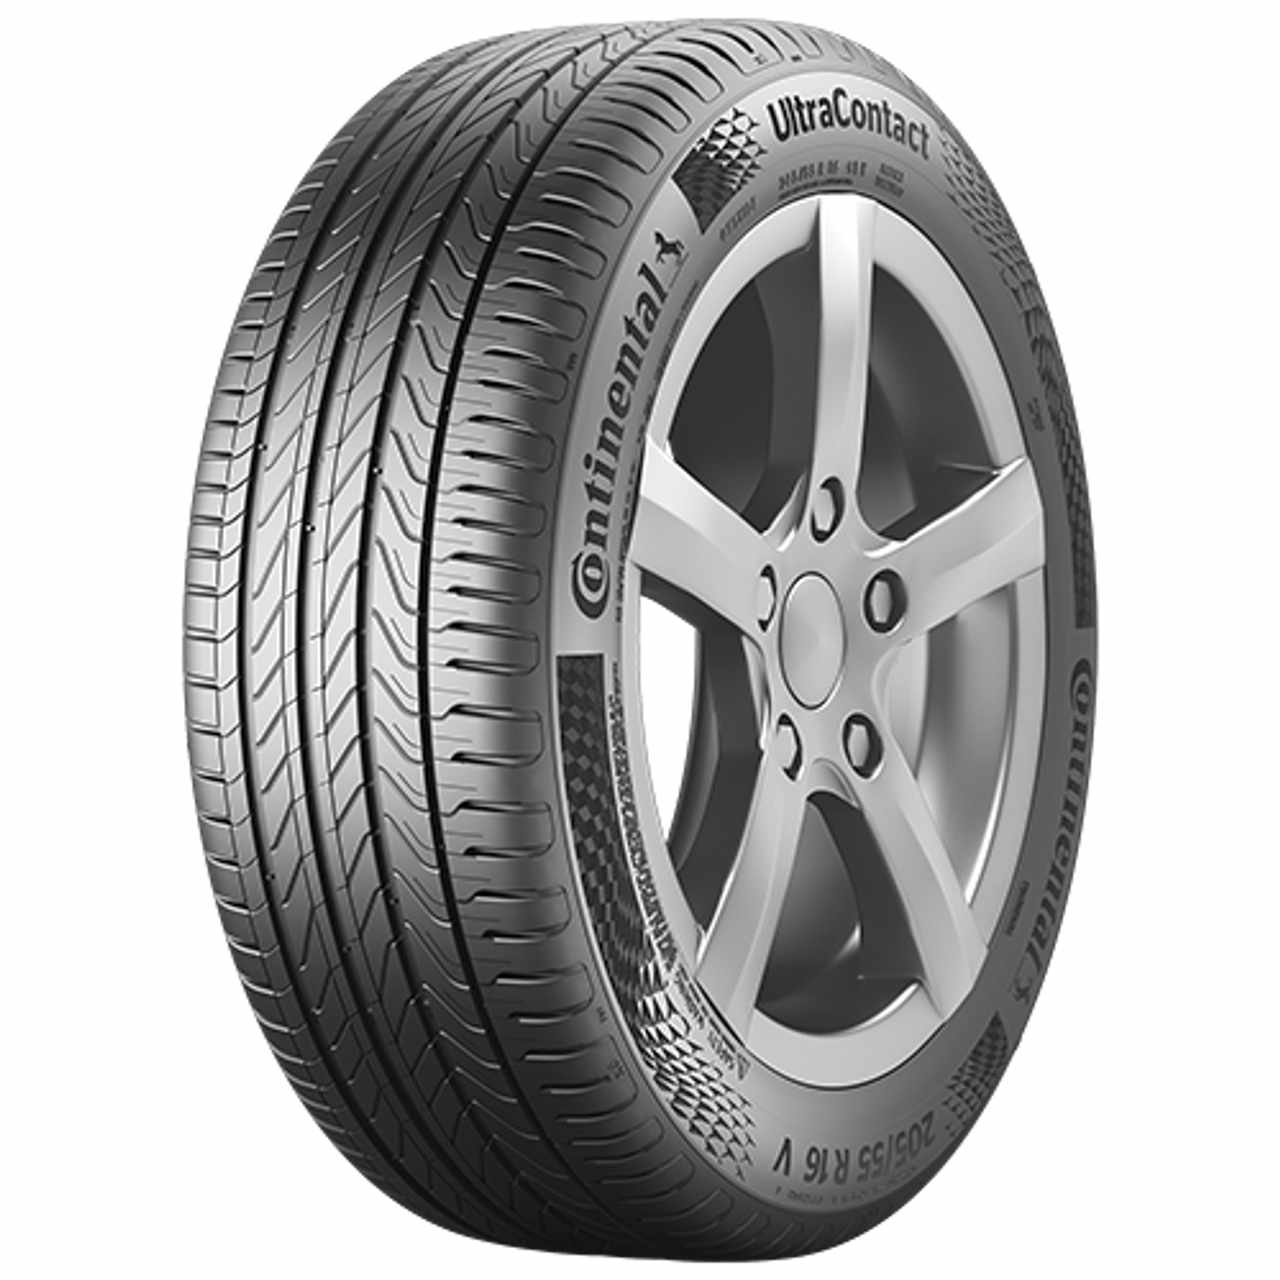 CONTINENTAL ULTRACONTACT (EVc) 195/55R15 85V BSW